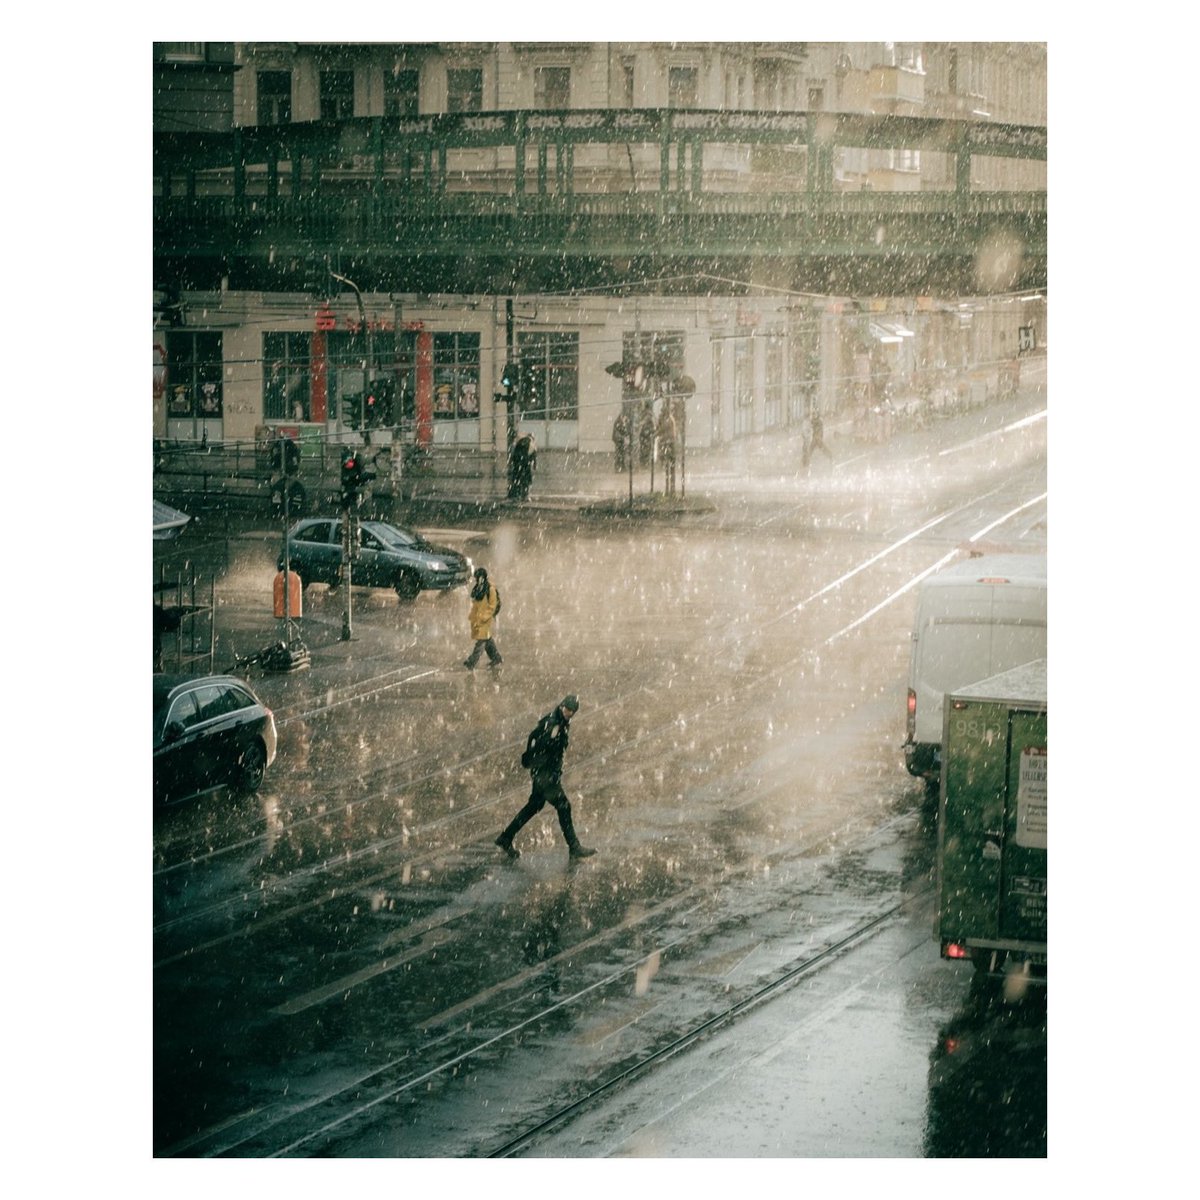 This Street Shot was taken by @streetcalling_ 
We want to see all genres of Street Shots. Please continue to use #ssicollaborative and follow @streetshotsinternational for the chance to be featured.
#StreetPhotography #rainyday #moody #streetshot #streetphoto #silhouette #Berlin